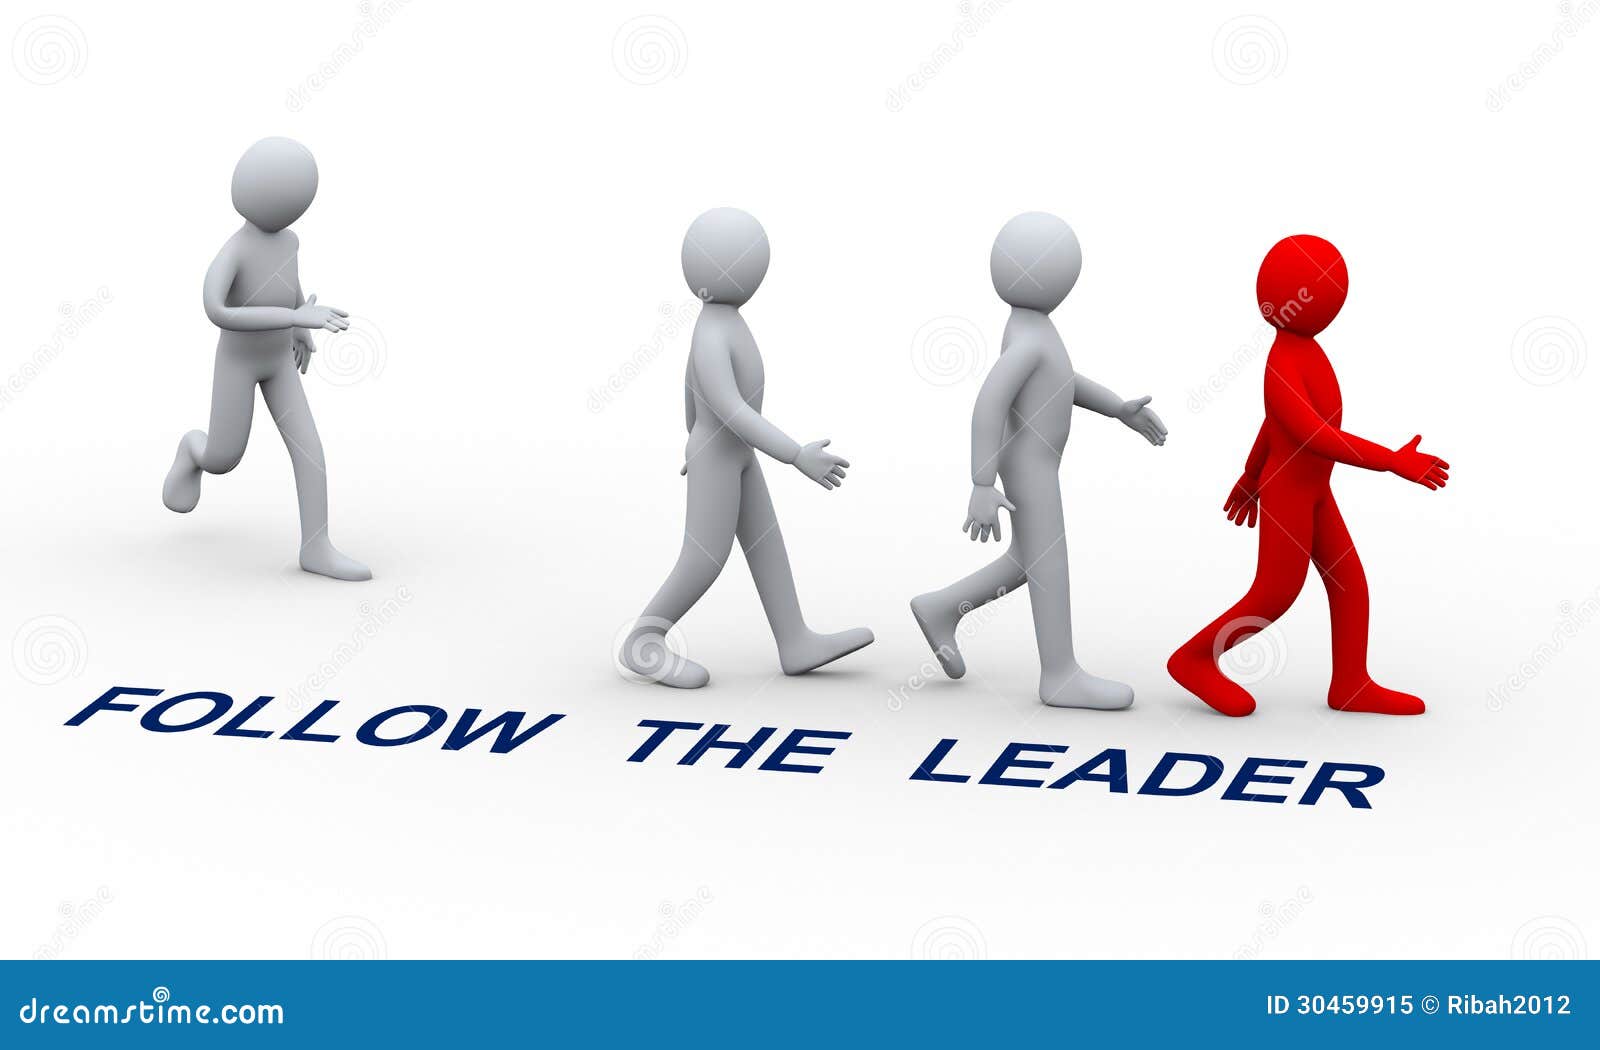 leadership clipart free download - photo #37